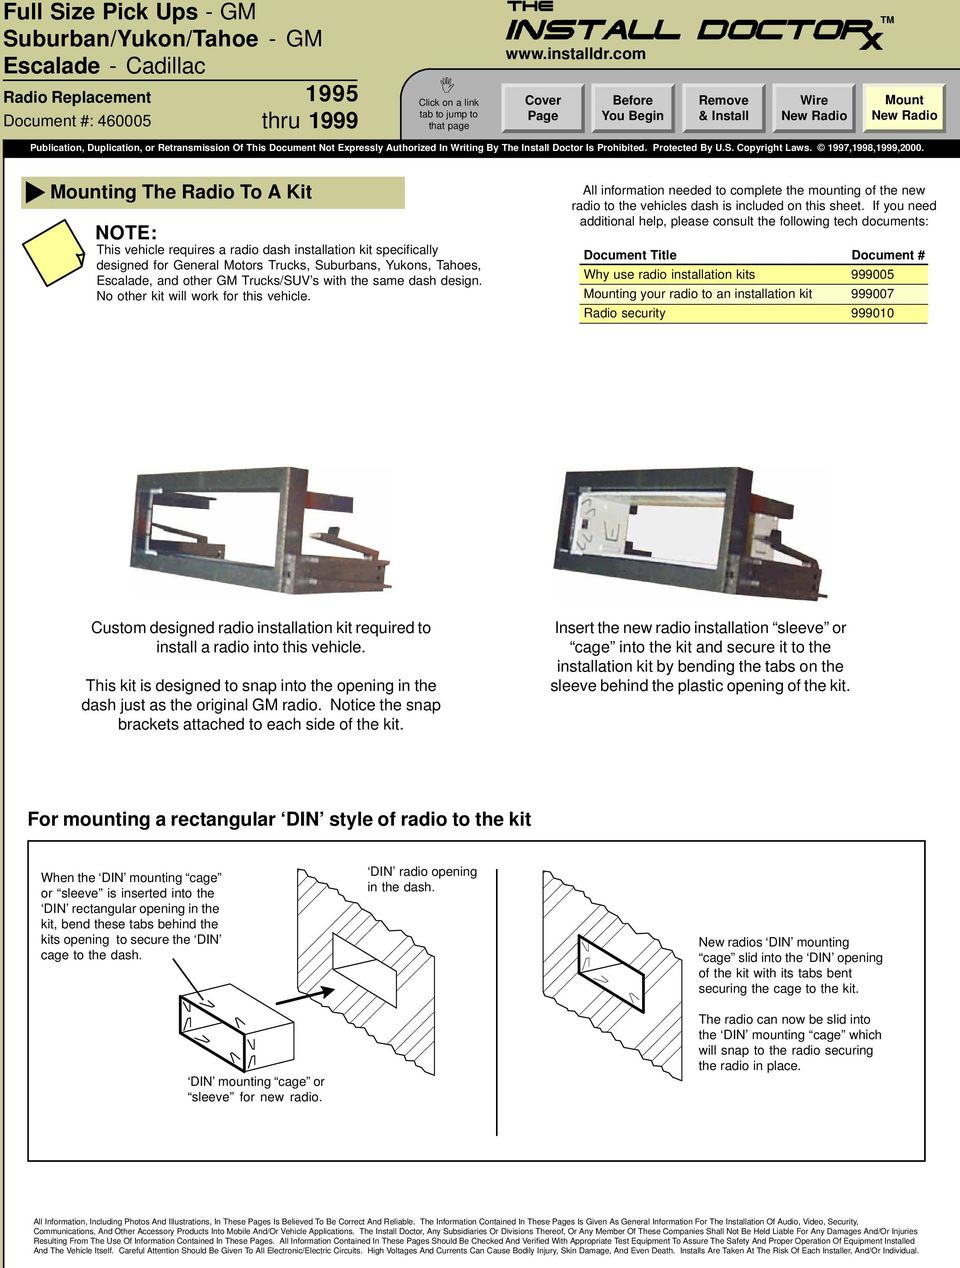 the same dash design. No other kit will work for this vehicle. All information needed to complete the mounting of the new radio to the vehicles dash is included on this sheet.